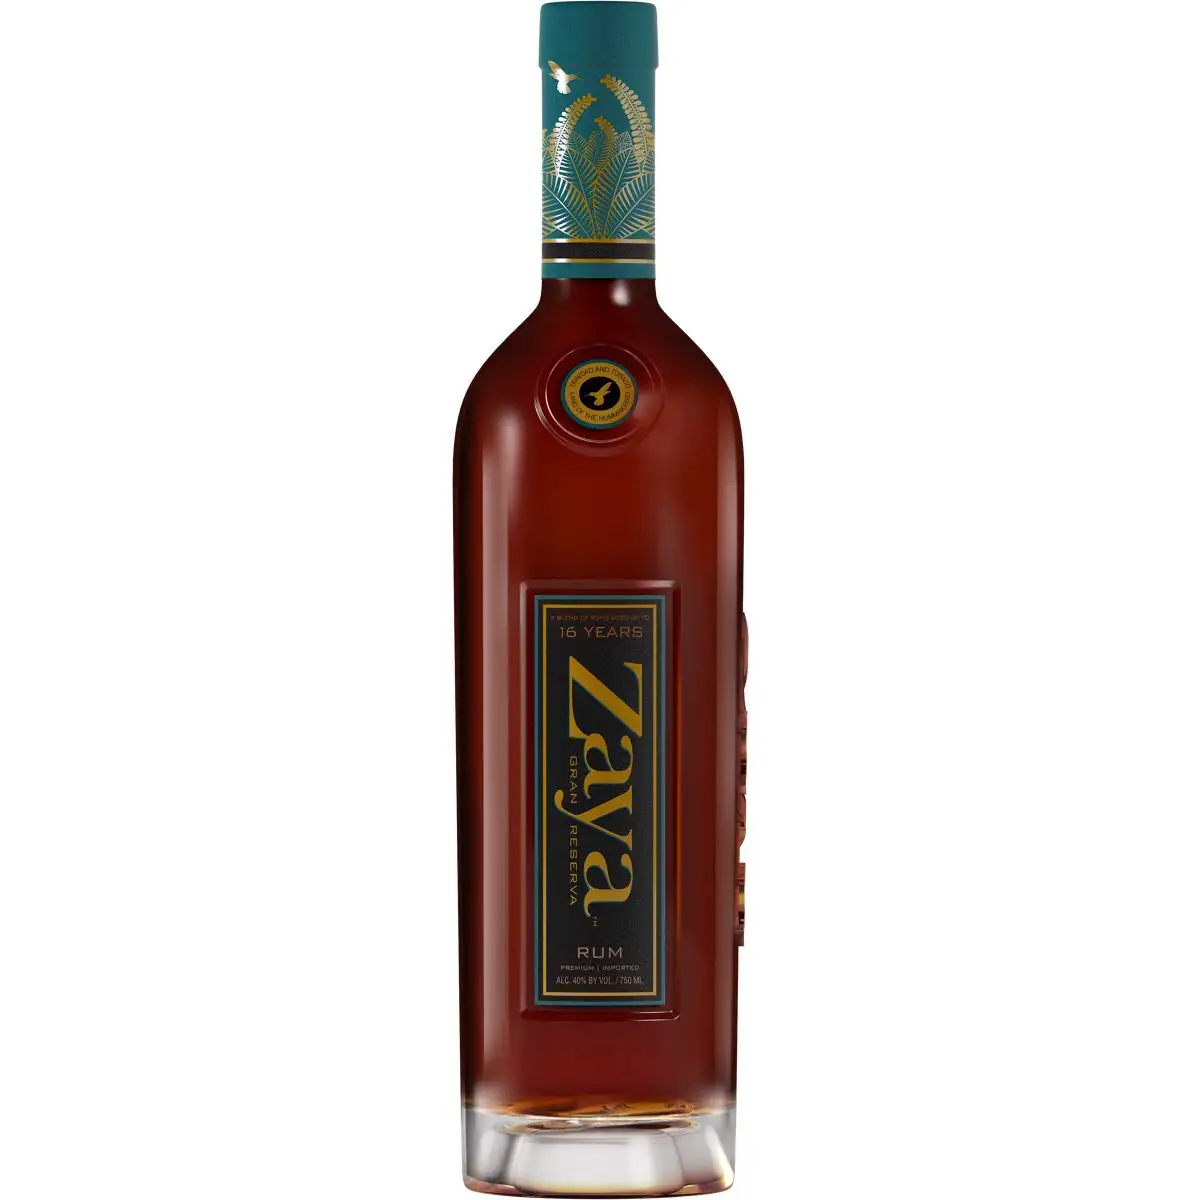 Image of the front of the bottle of the rum Zaya Rum Gran Reserva